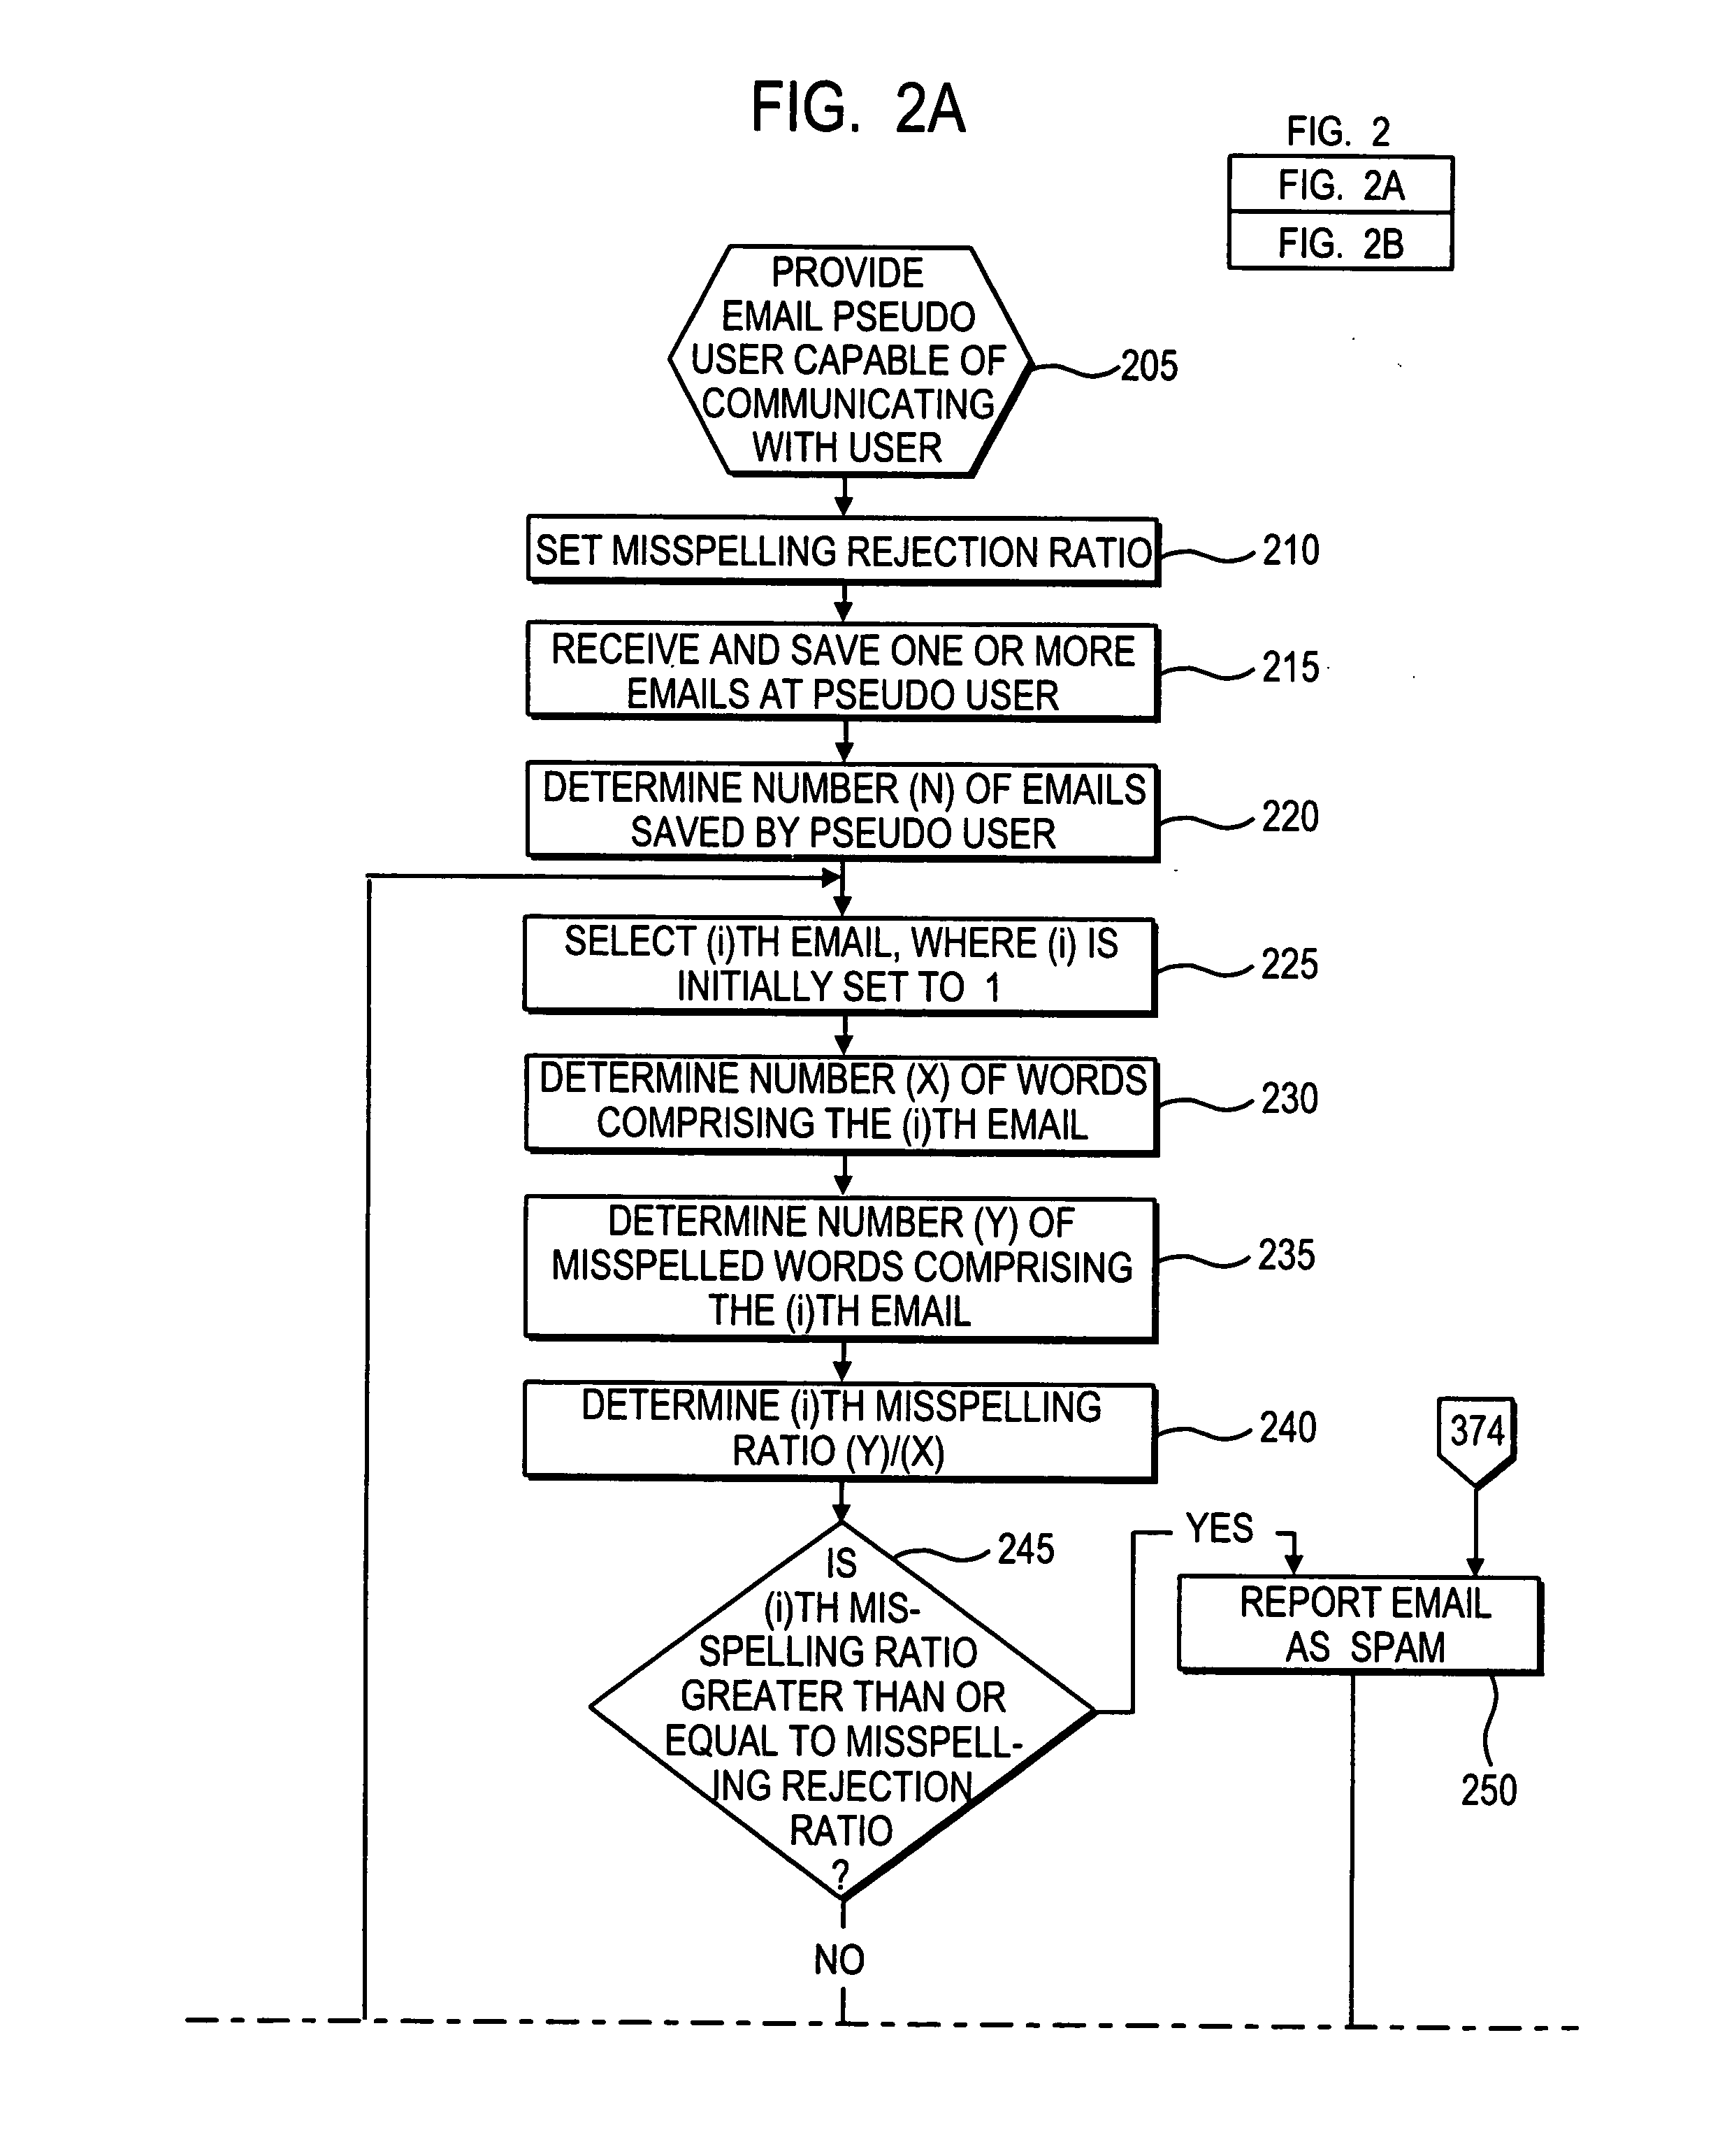 Apparatus and method to identify SPAM emails